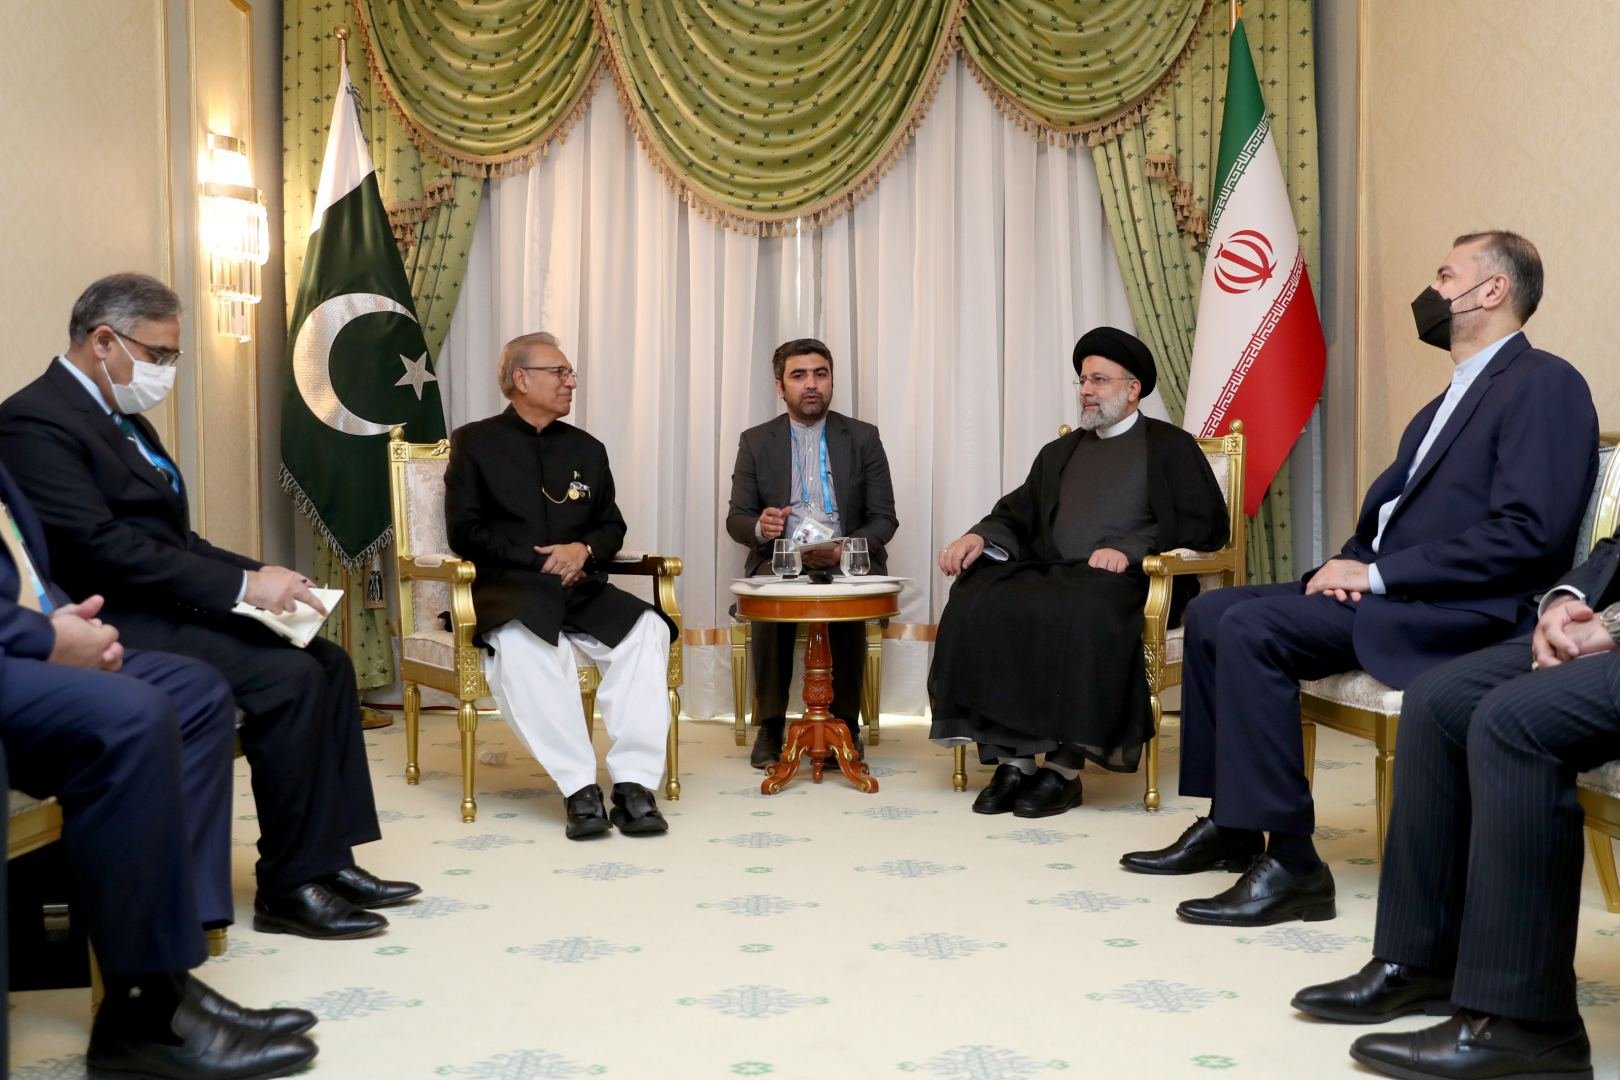 Iran interested in comprehensively developing relations with Pakistan – Raisi